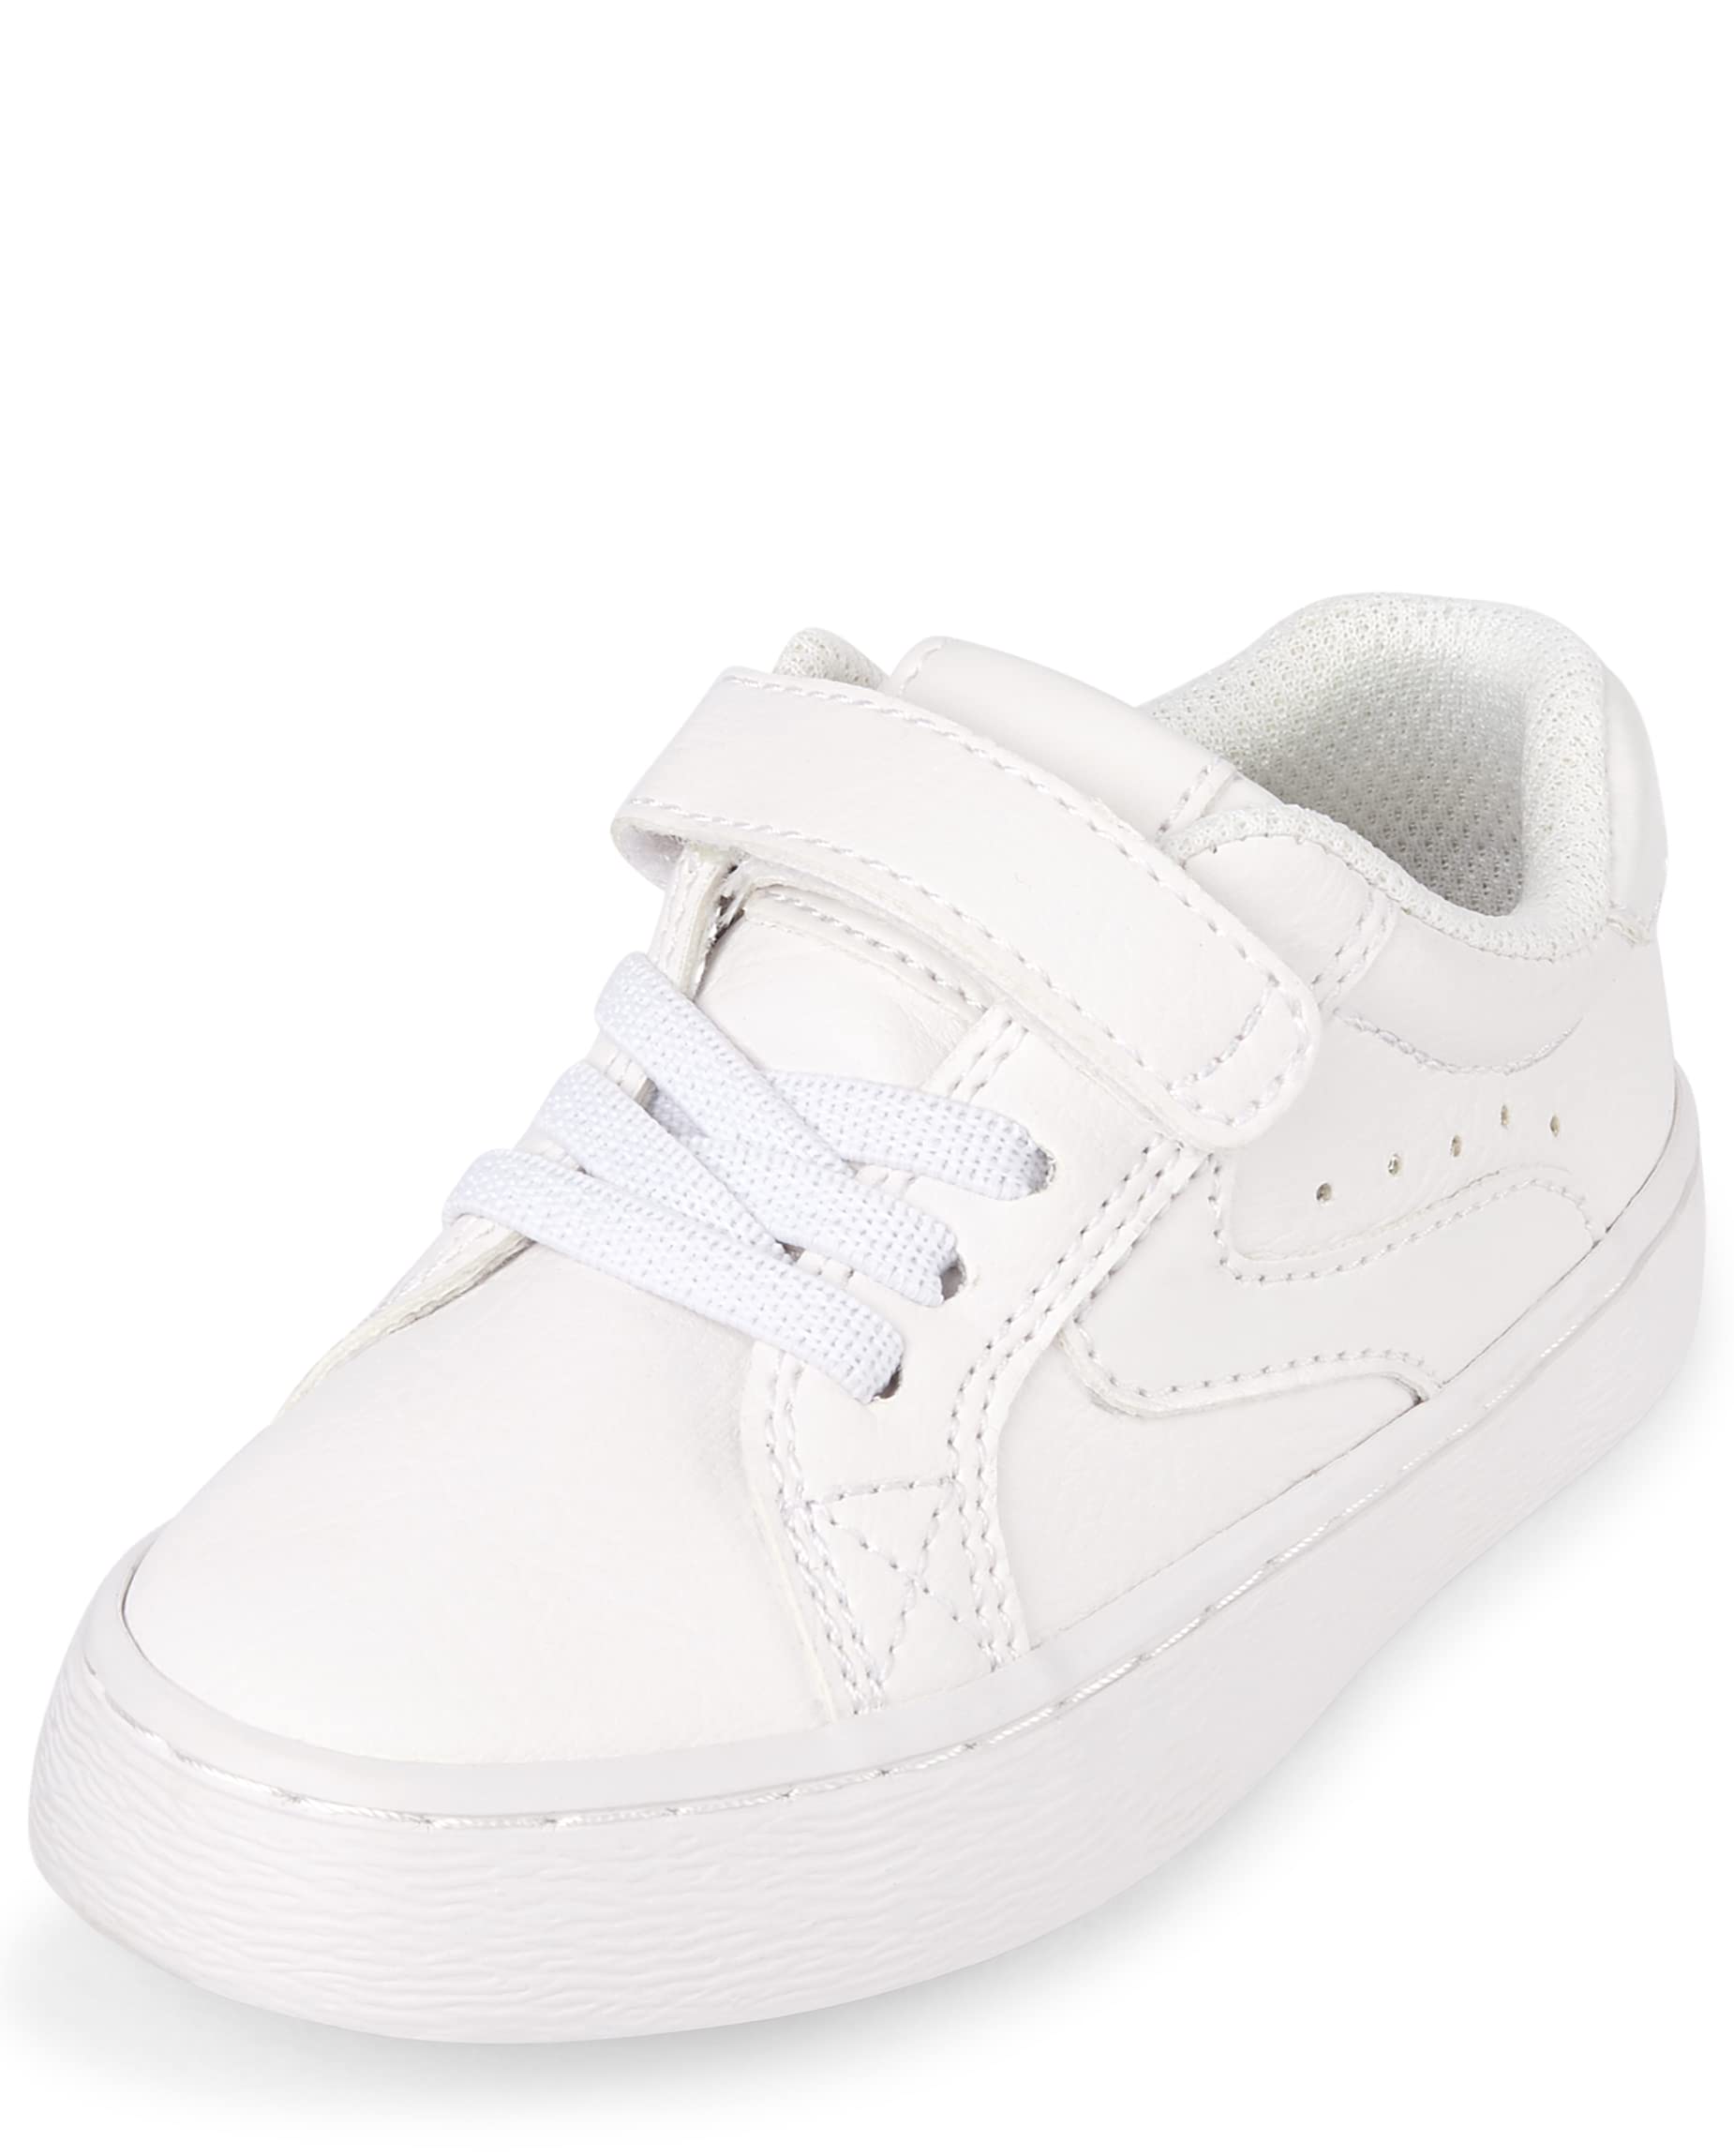 The Children's Place,boys,The Children's Place Toddler Boys Low Top Sneakers,and Toddler Uniform Low Top Sneakers,White,6 Toddler